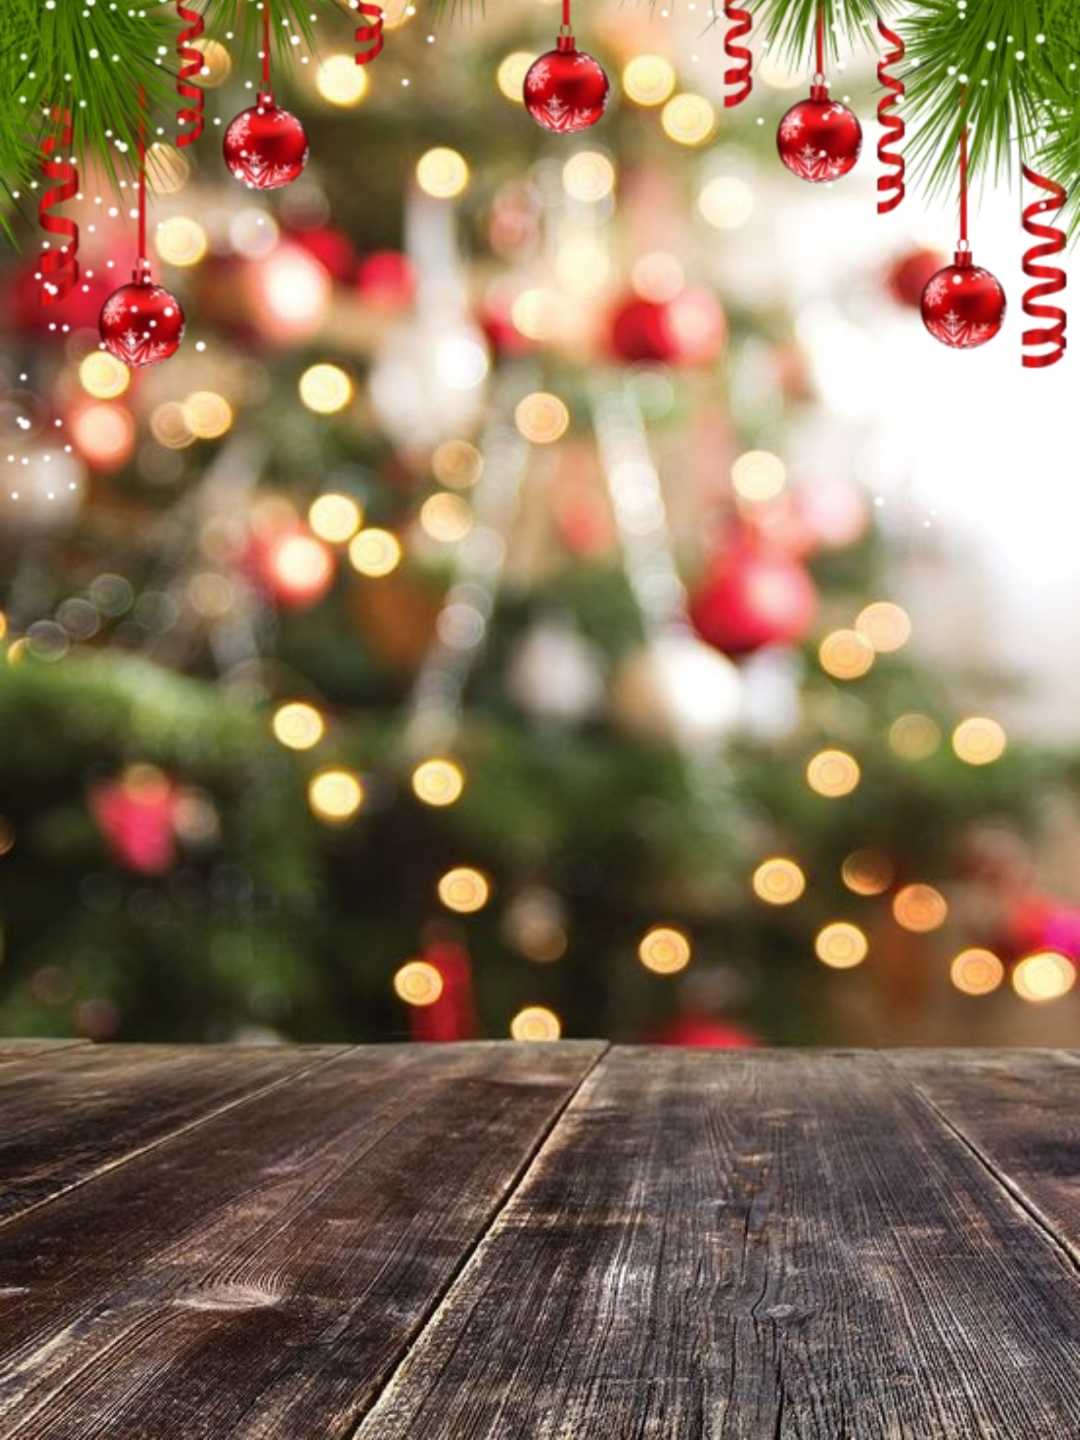 Merry Christmas editing background HD